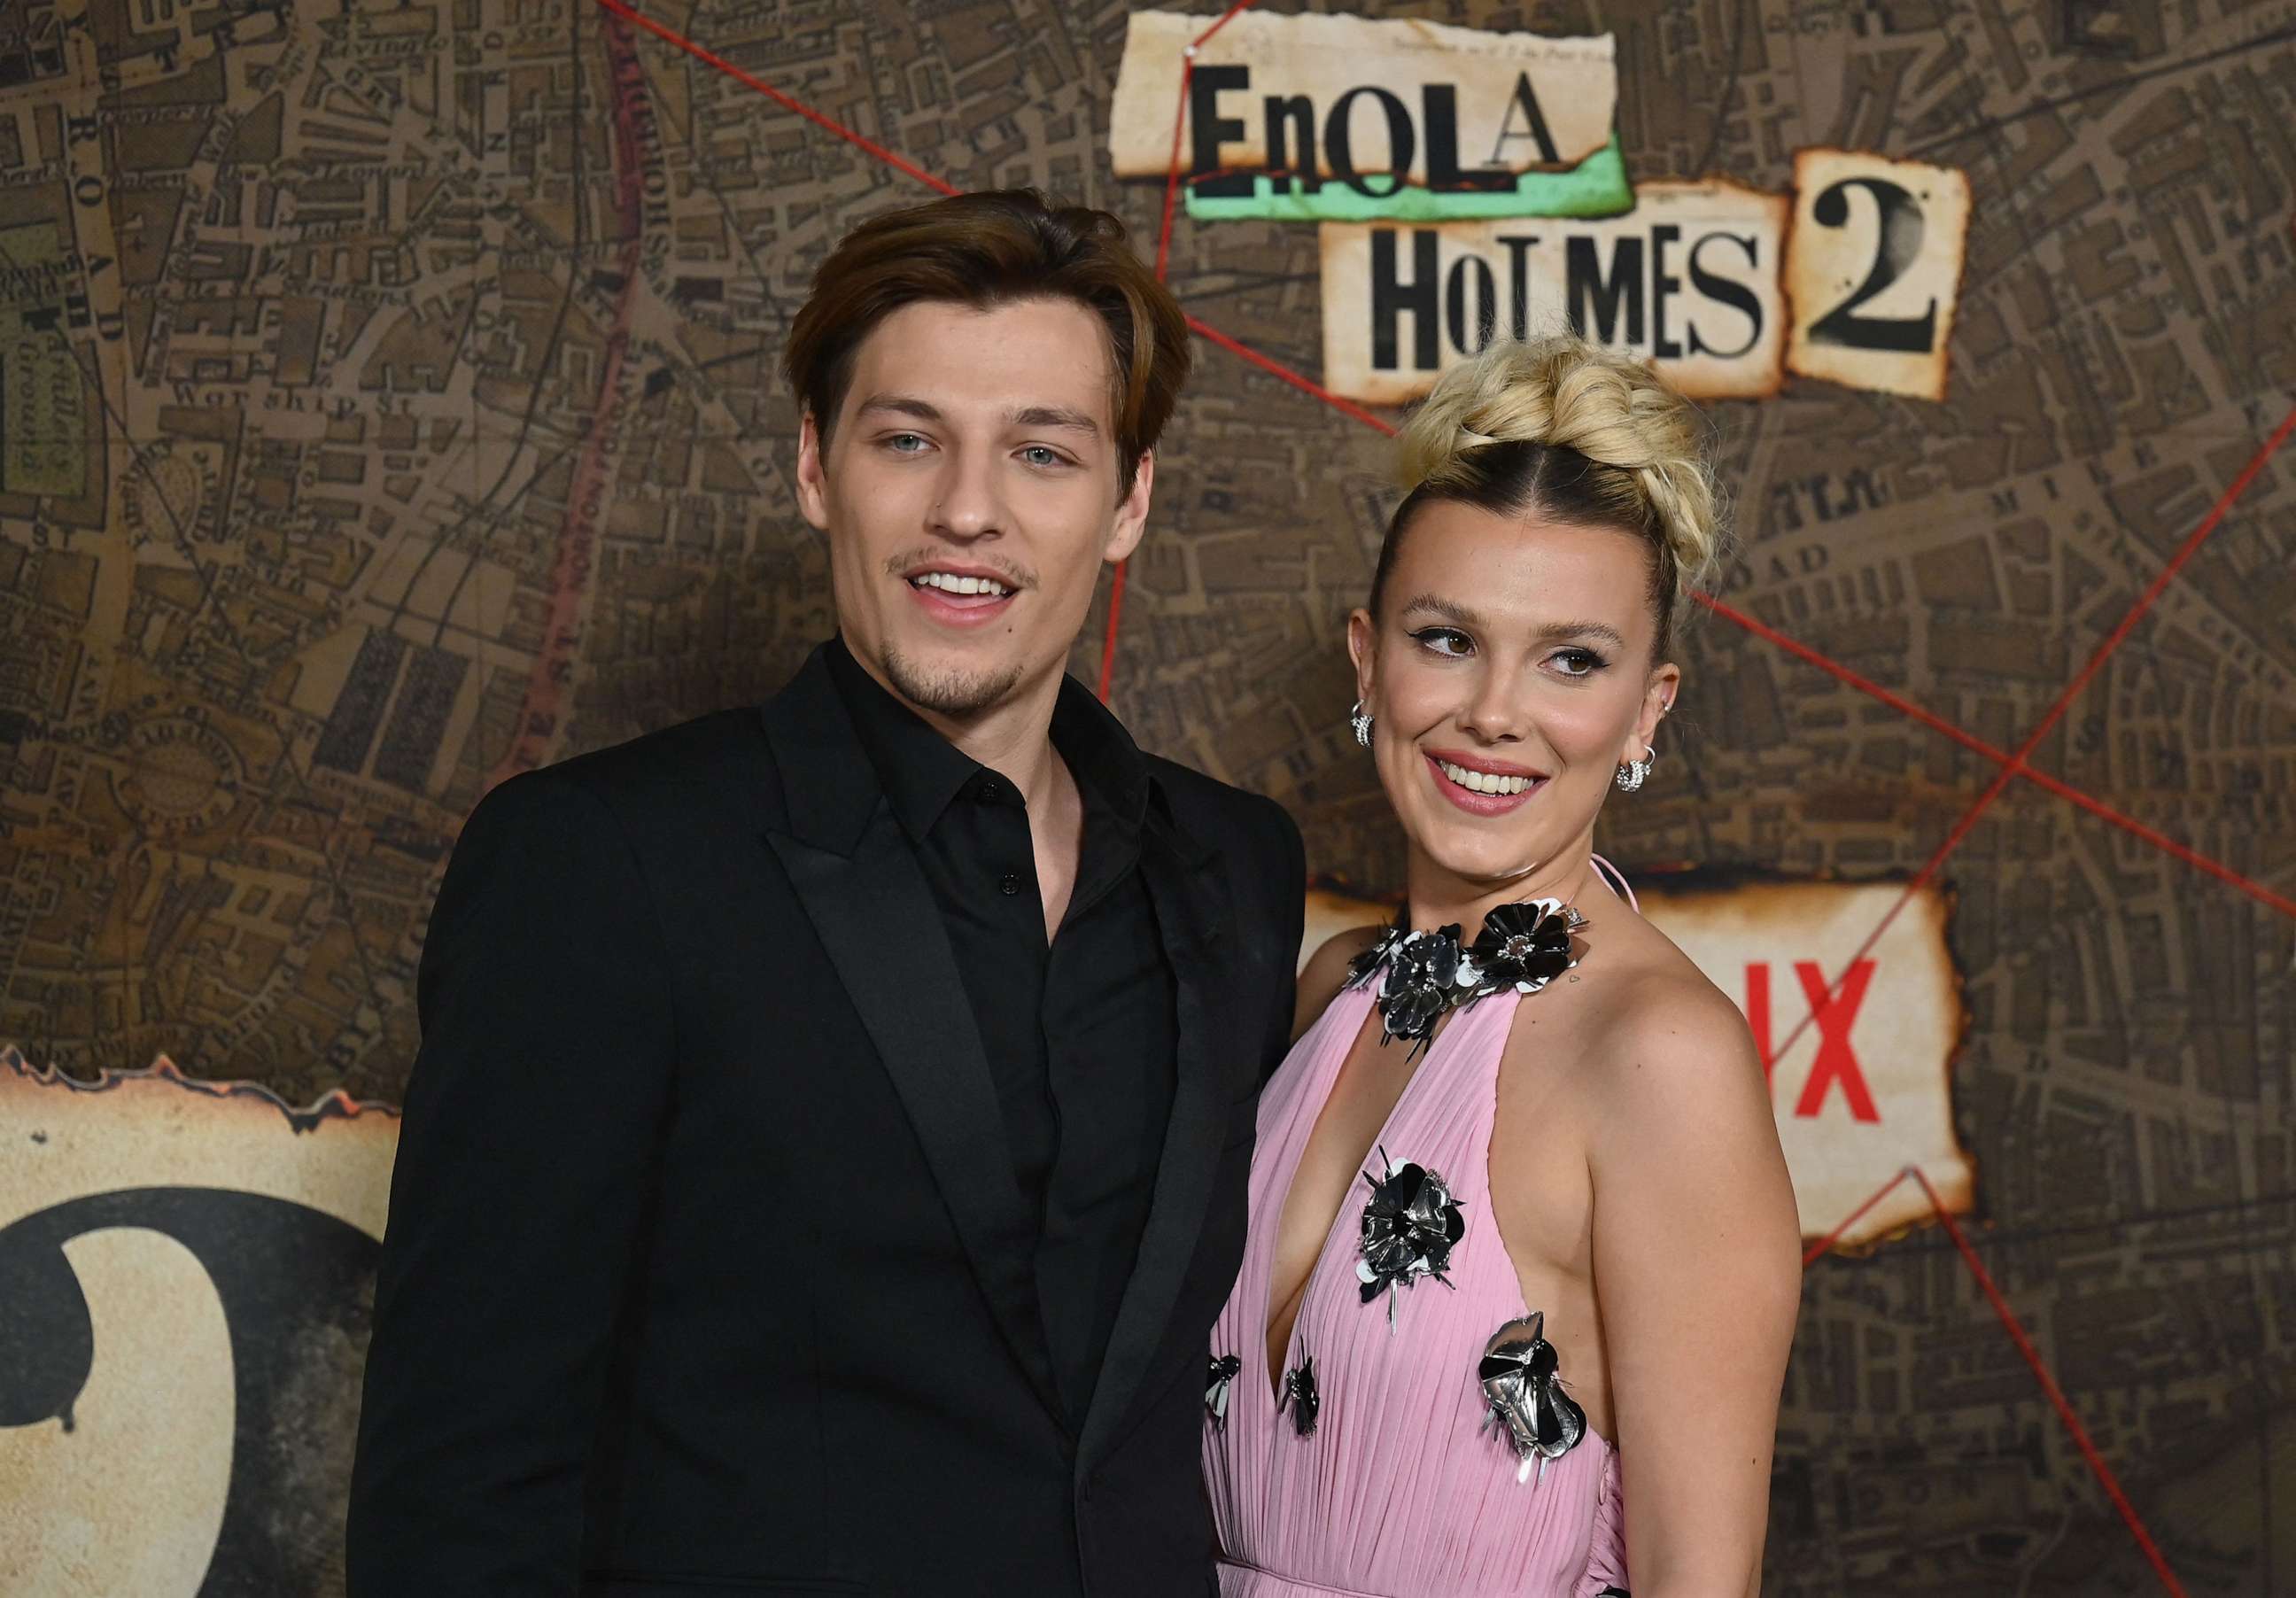 PHOTO: Jake Bongiovi and Millie Bobby Brown arrive for the premiere of Netflix's "Enola Holmes 2" at The Paris Theatre, Oct. 27, 2022, in New York City.